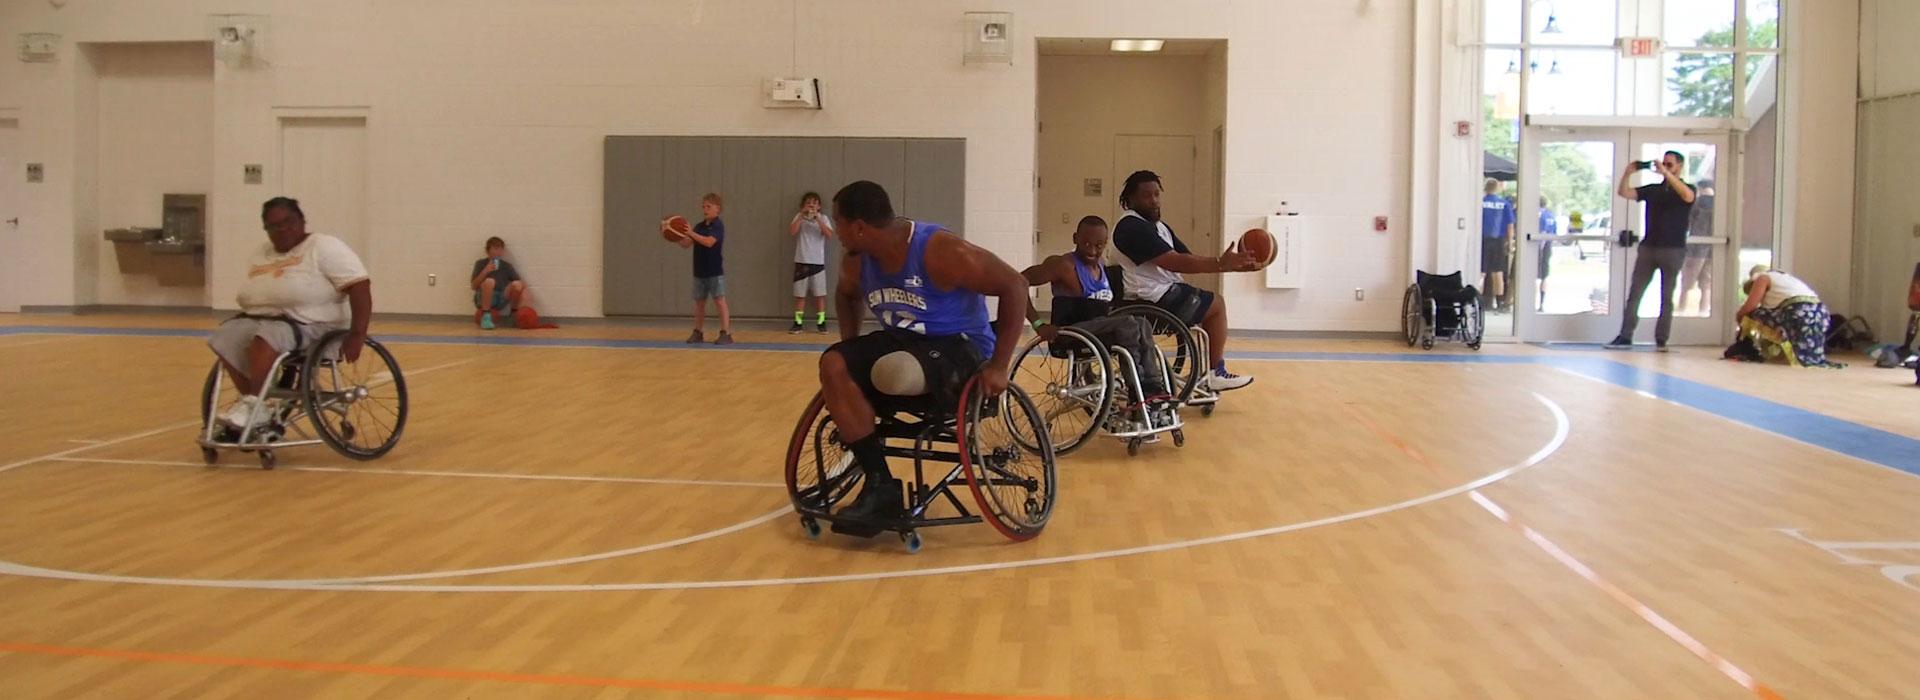 Men in wheelchairs playing basketball at YMCA JT's Camp Grom